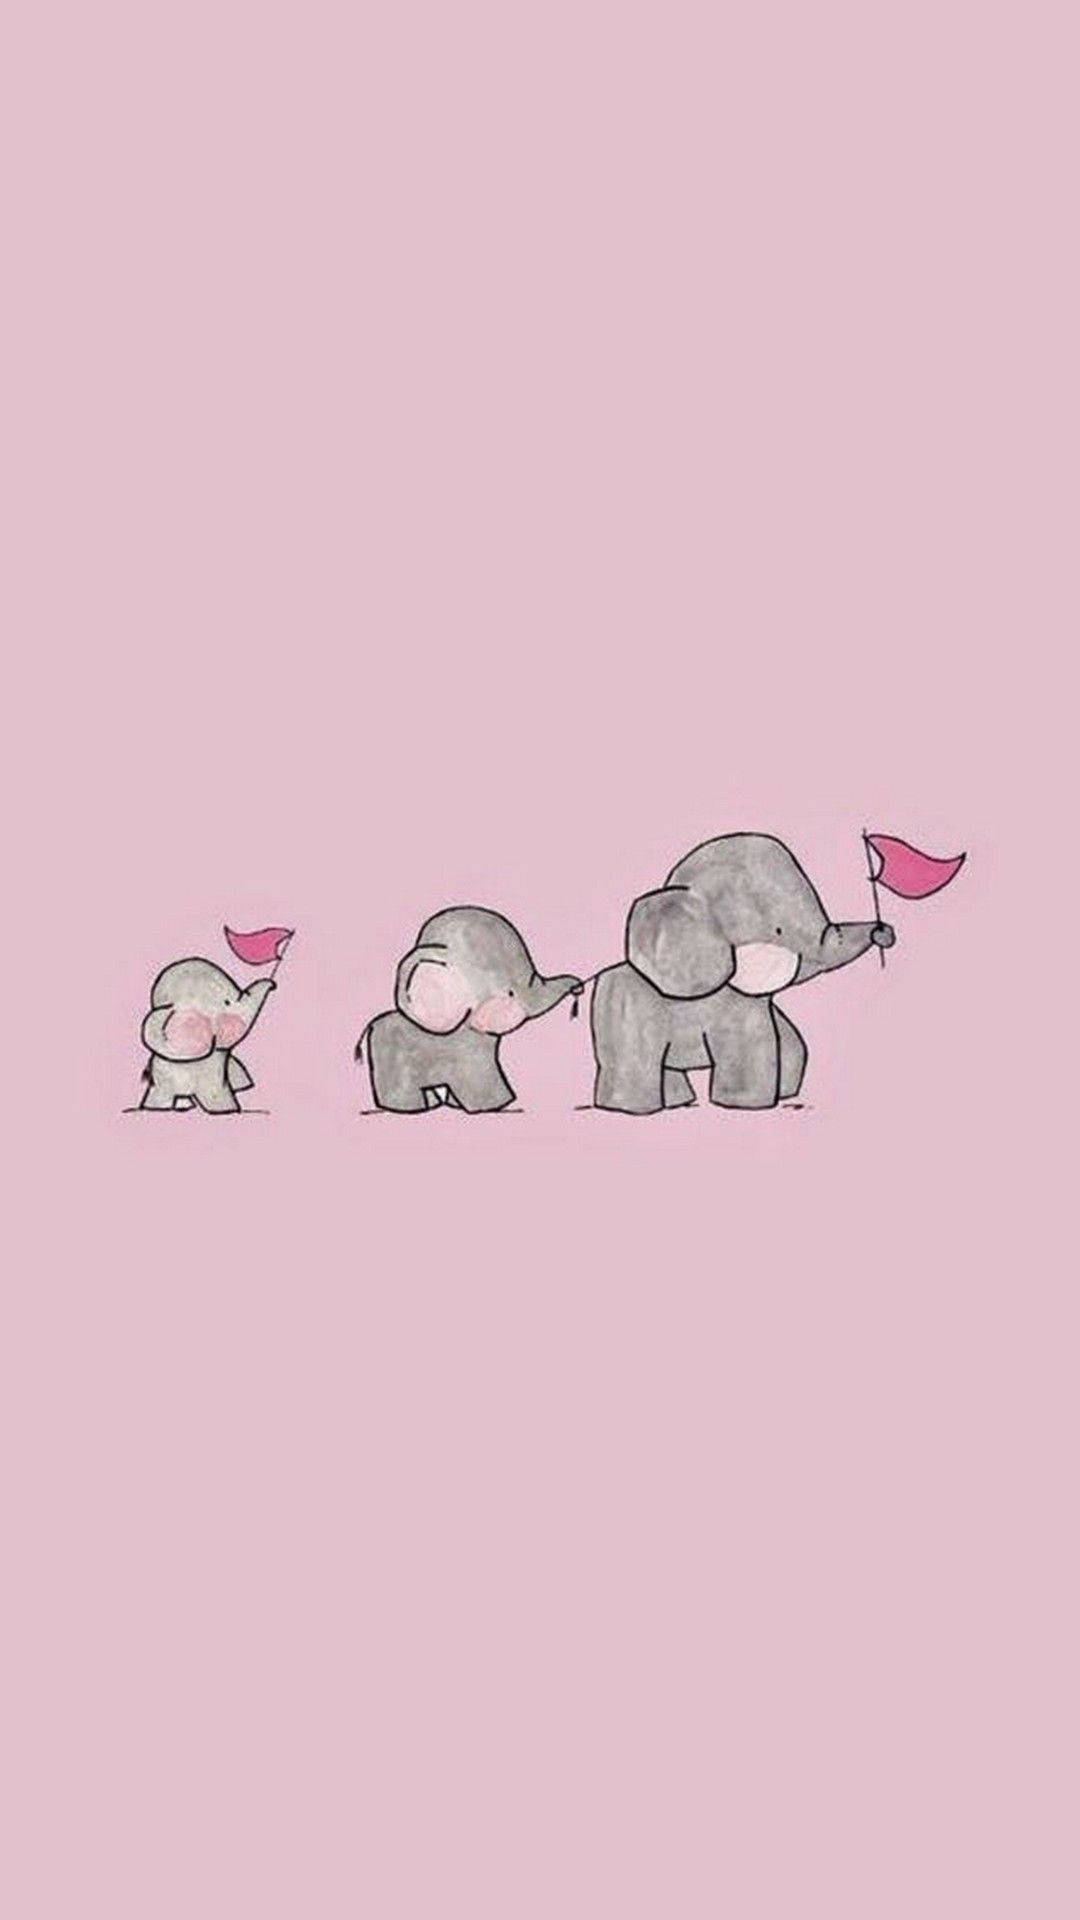 Cute And Pink Backdrop Of Three Elephants